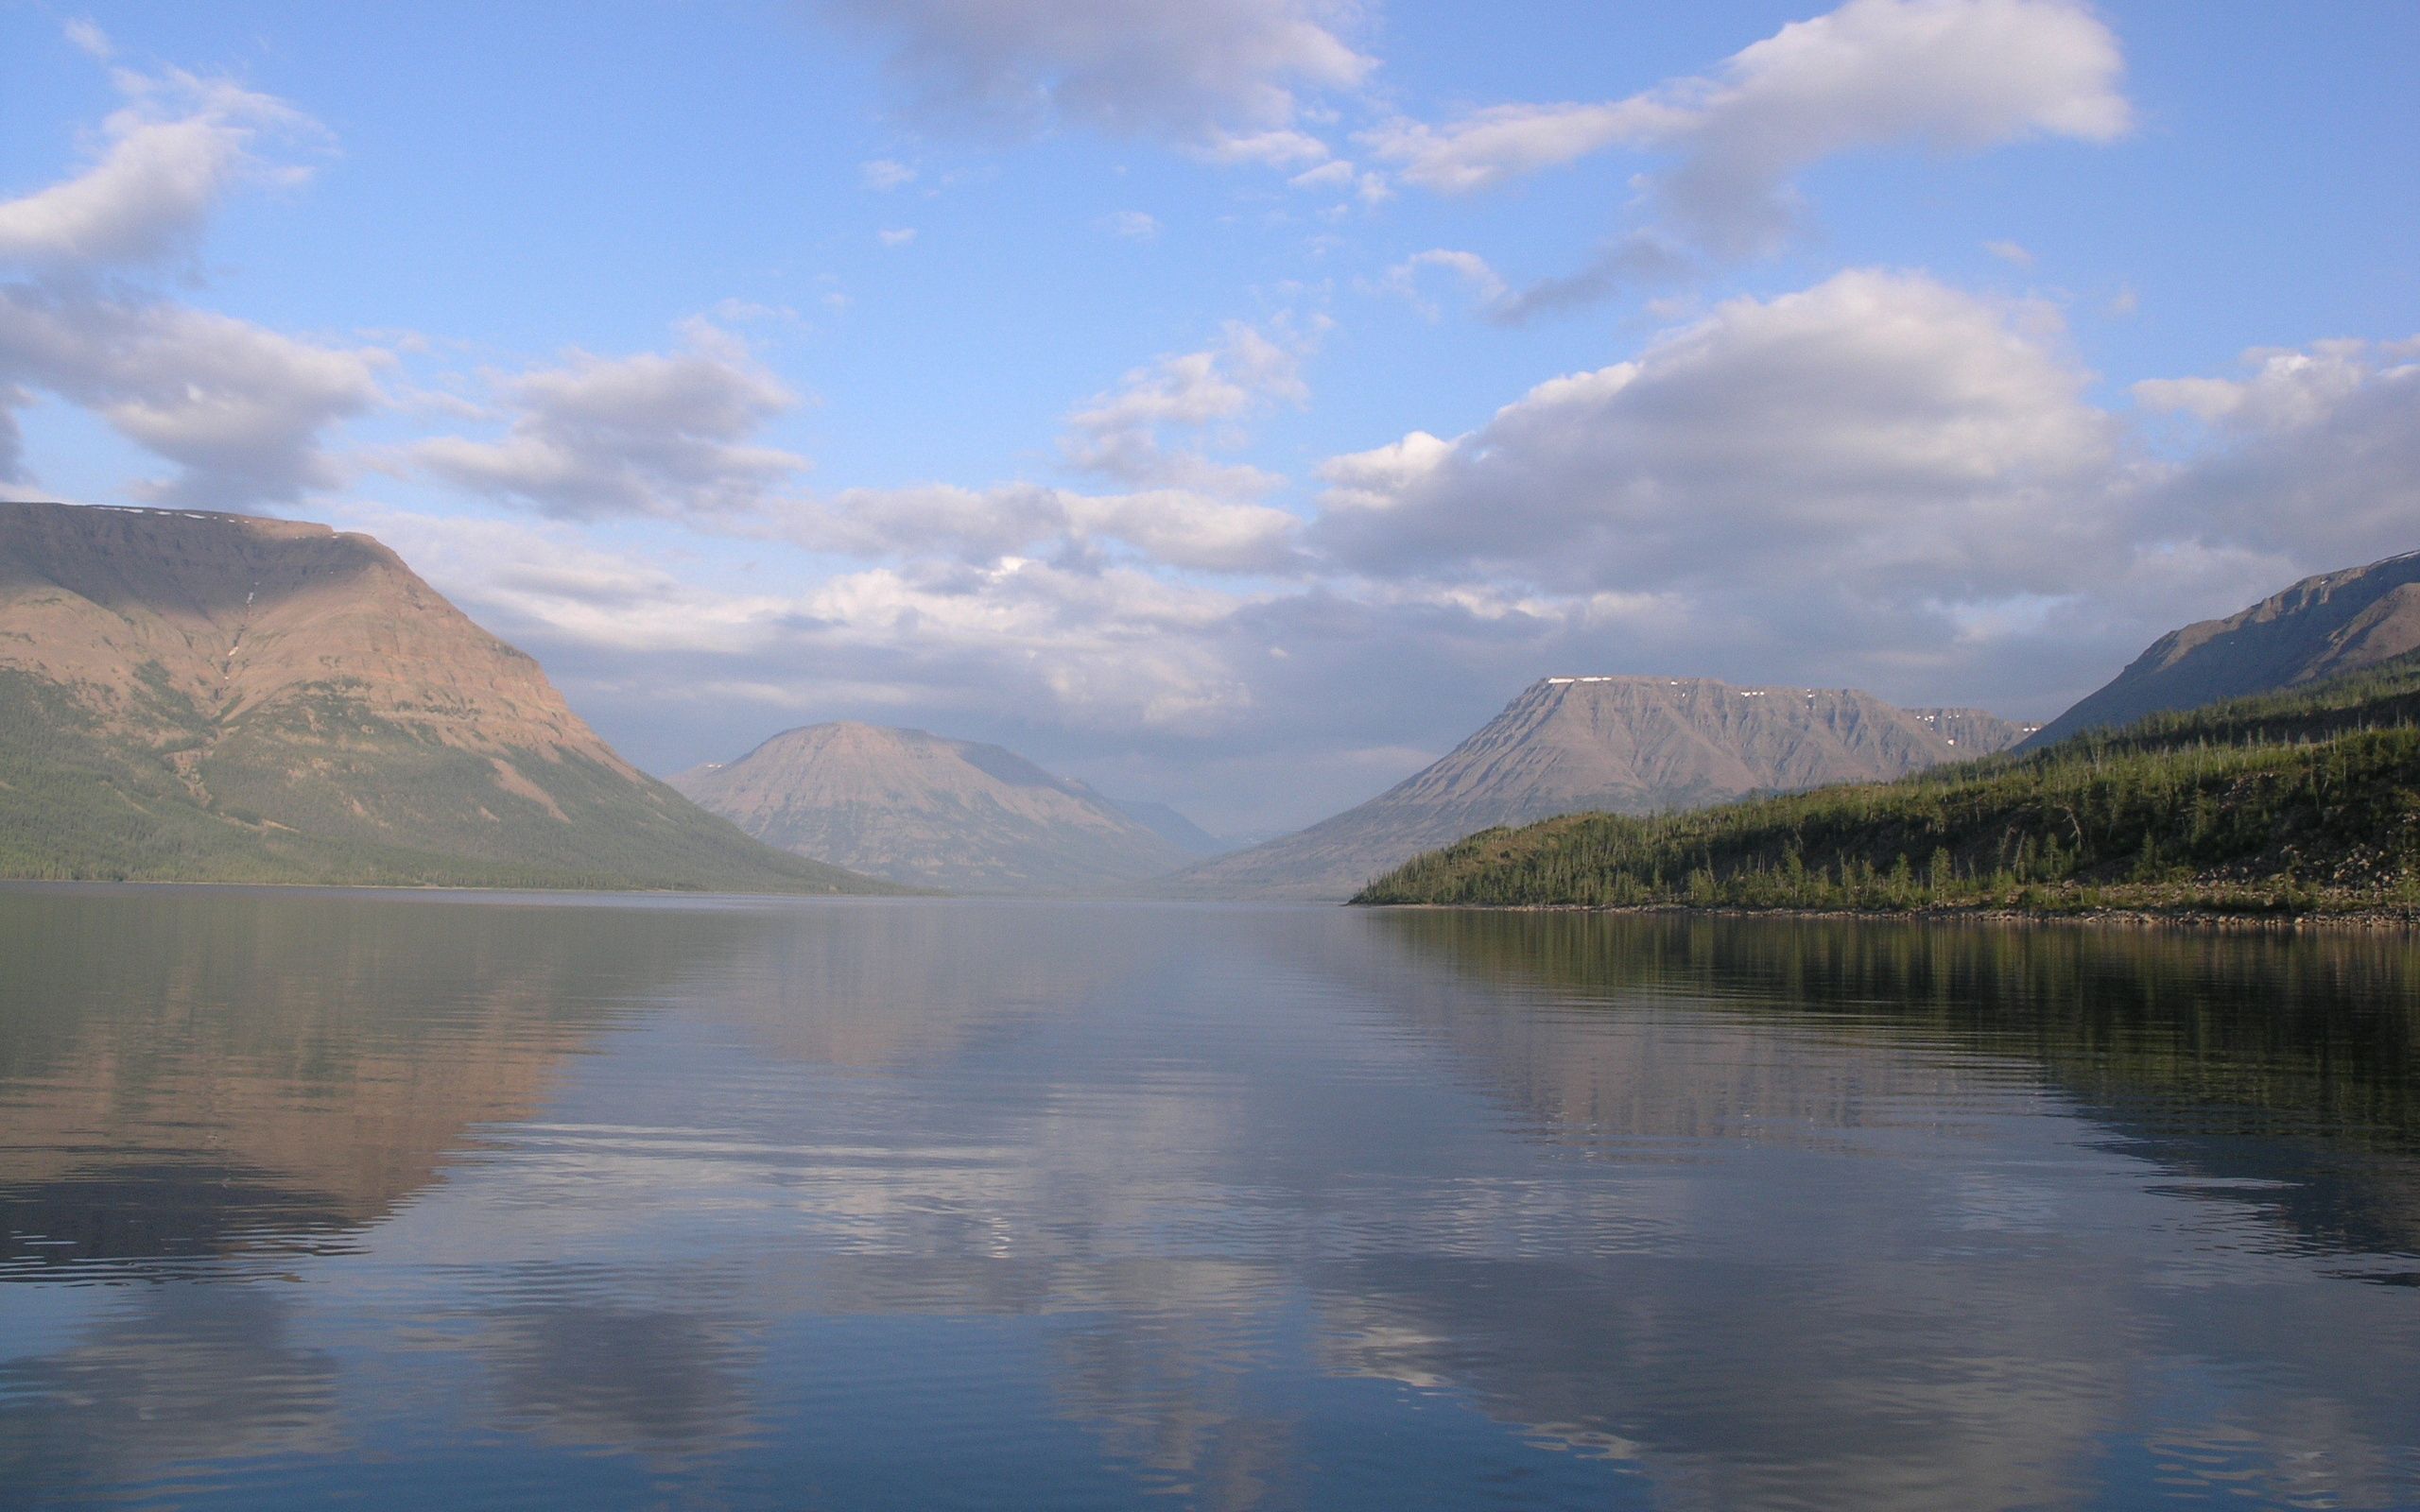 water surface, surface, nature, mountains, lake, fog, scattered, dispersed